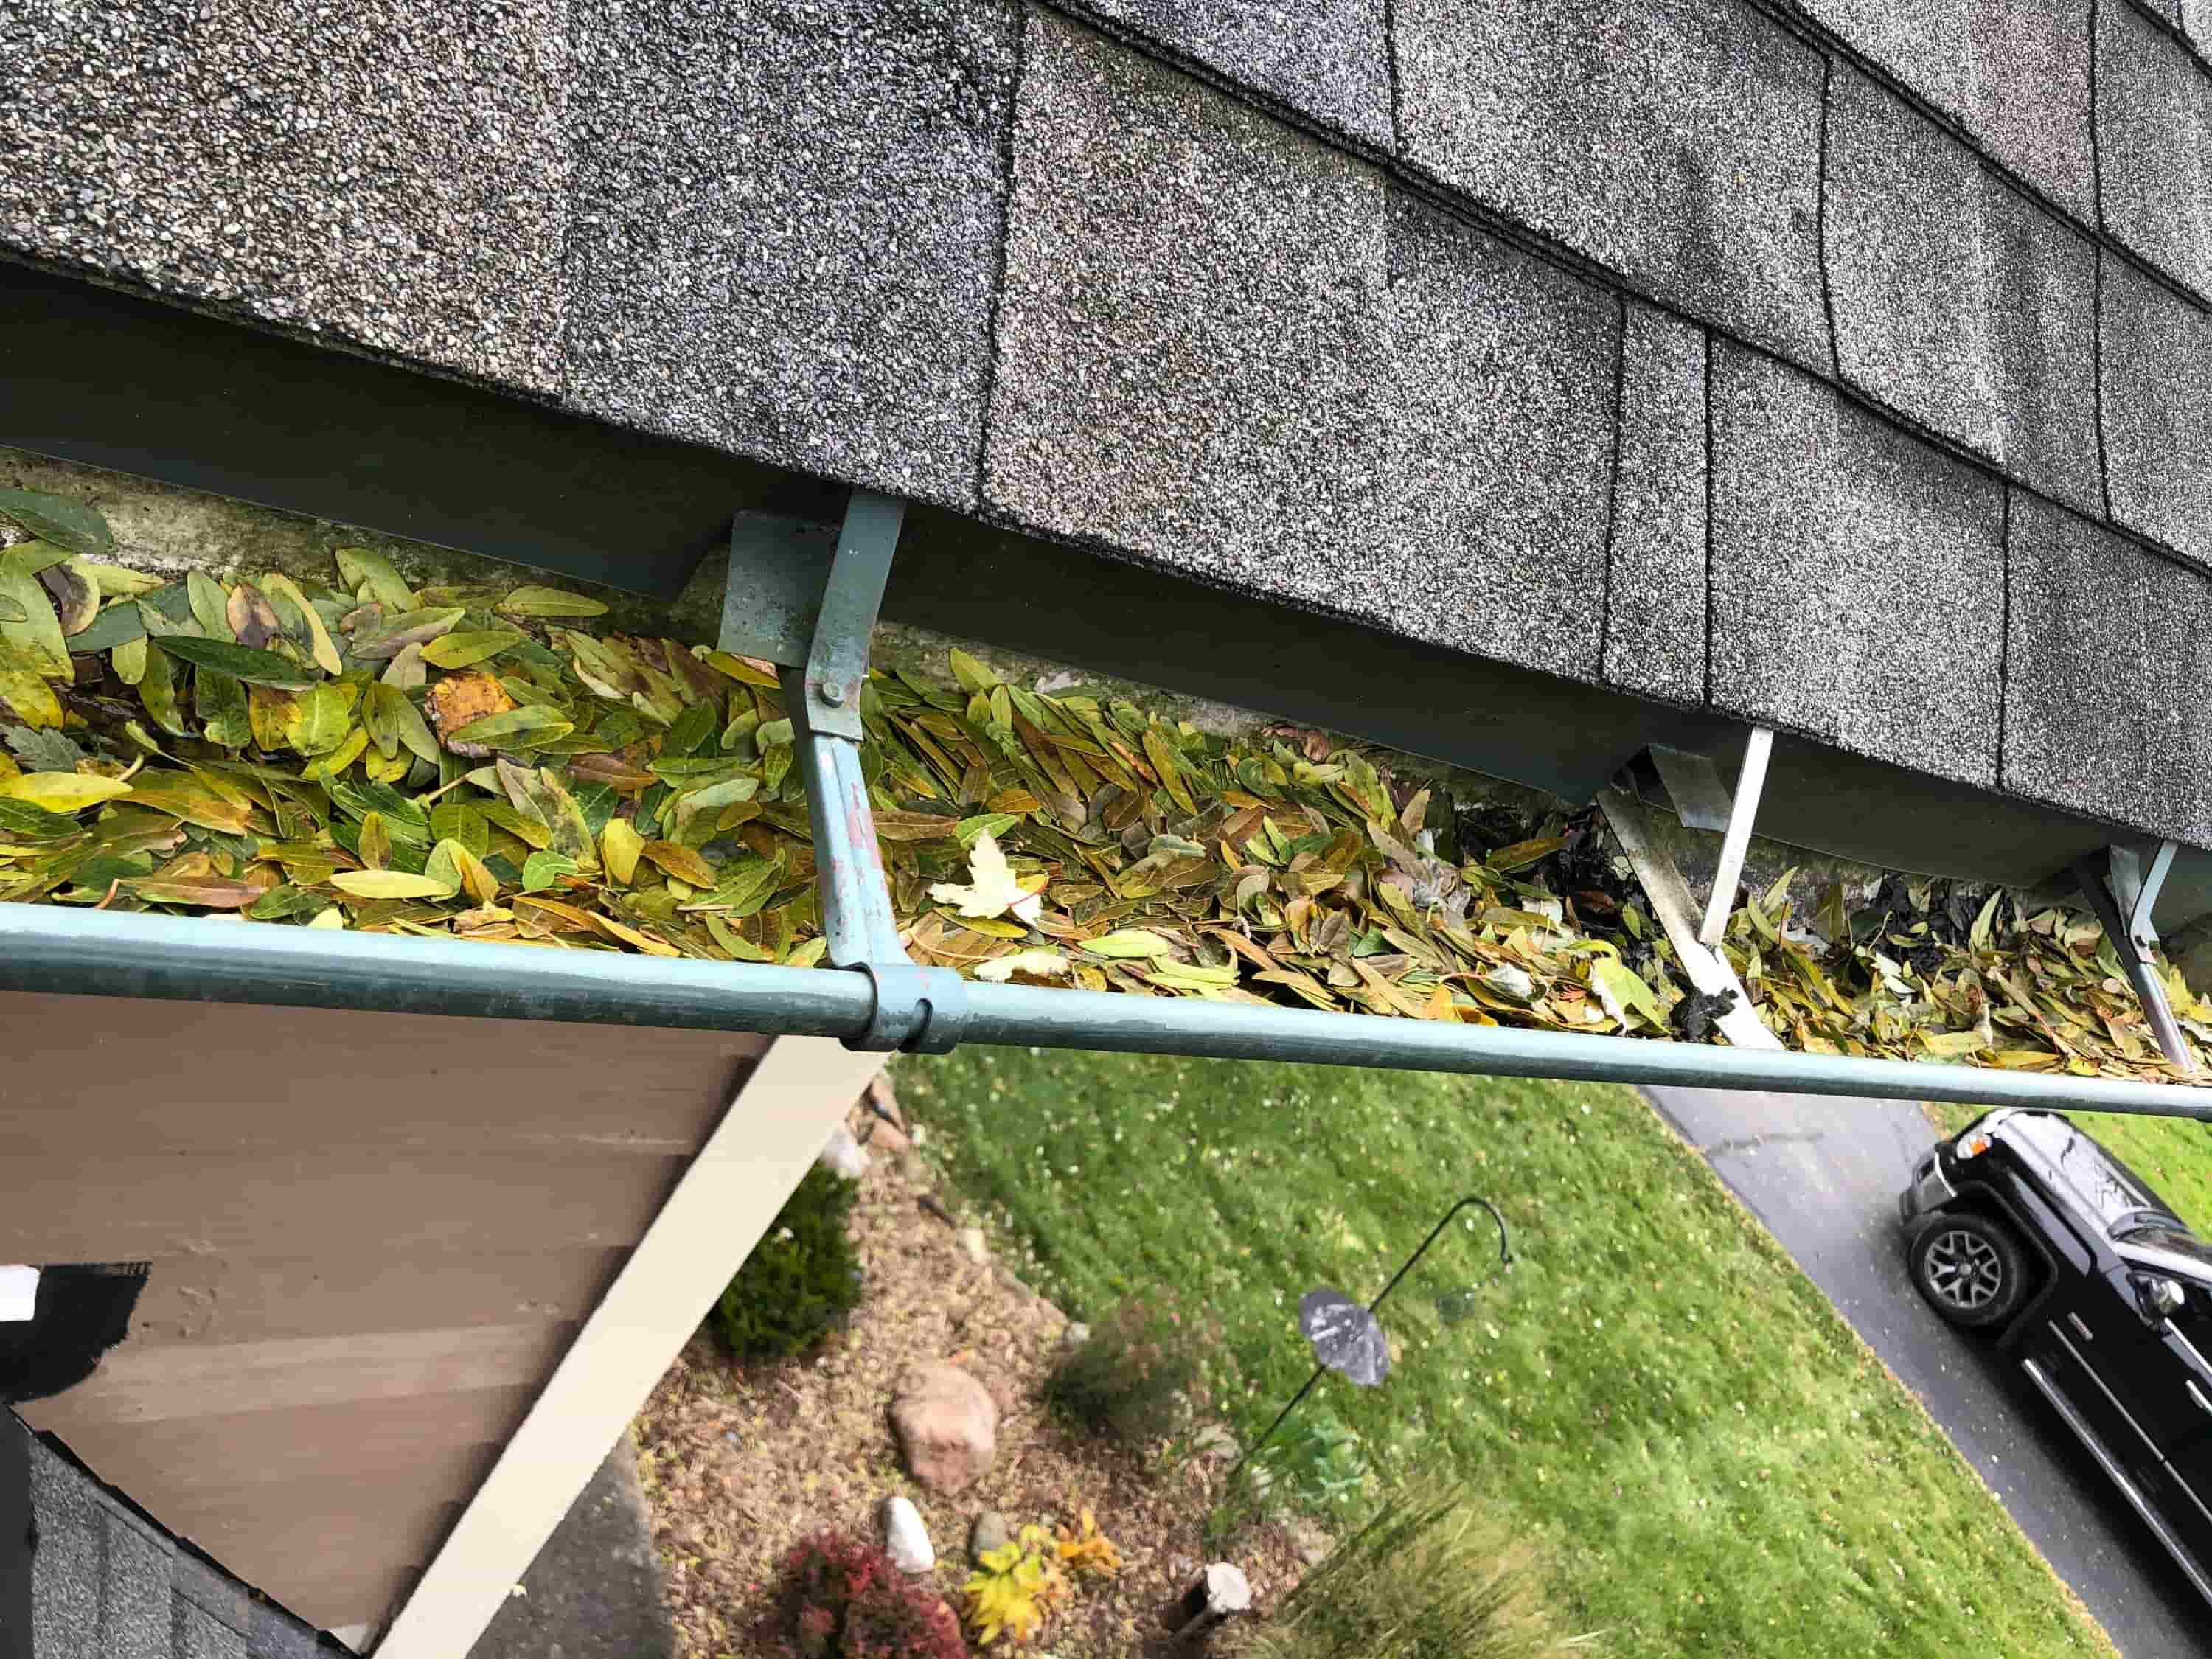 proper way to clean gutters